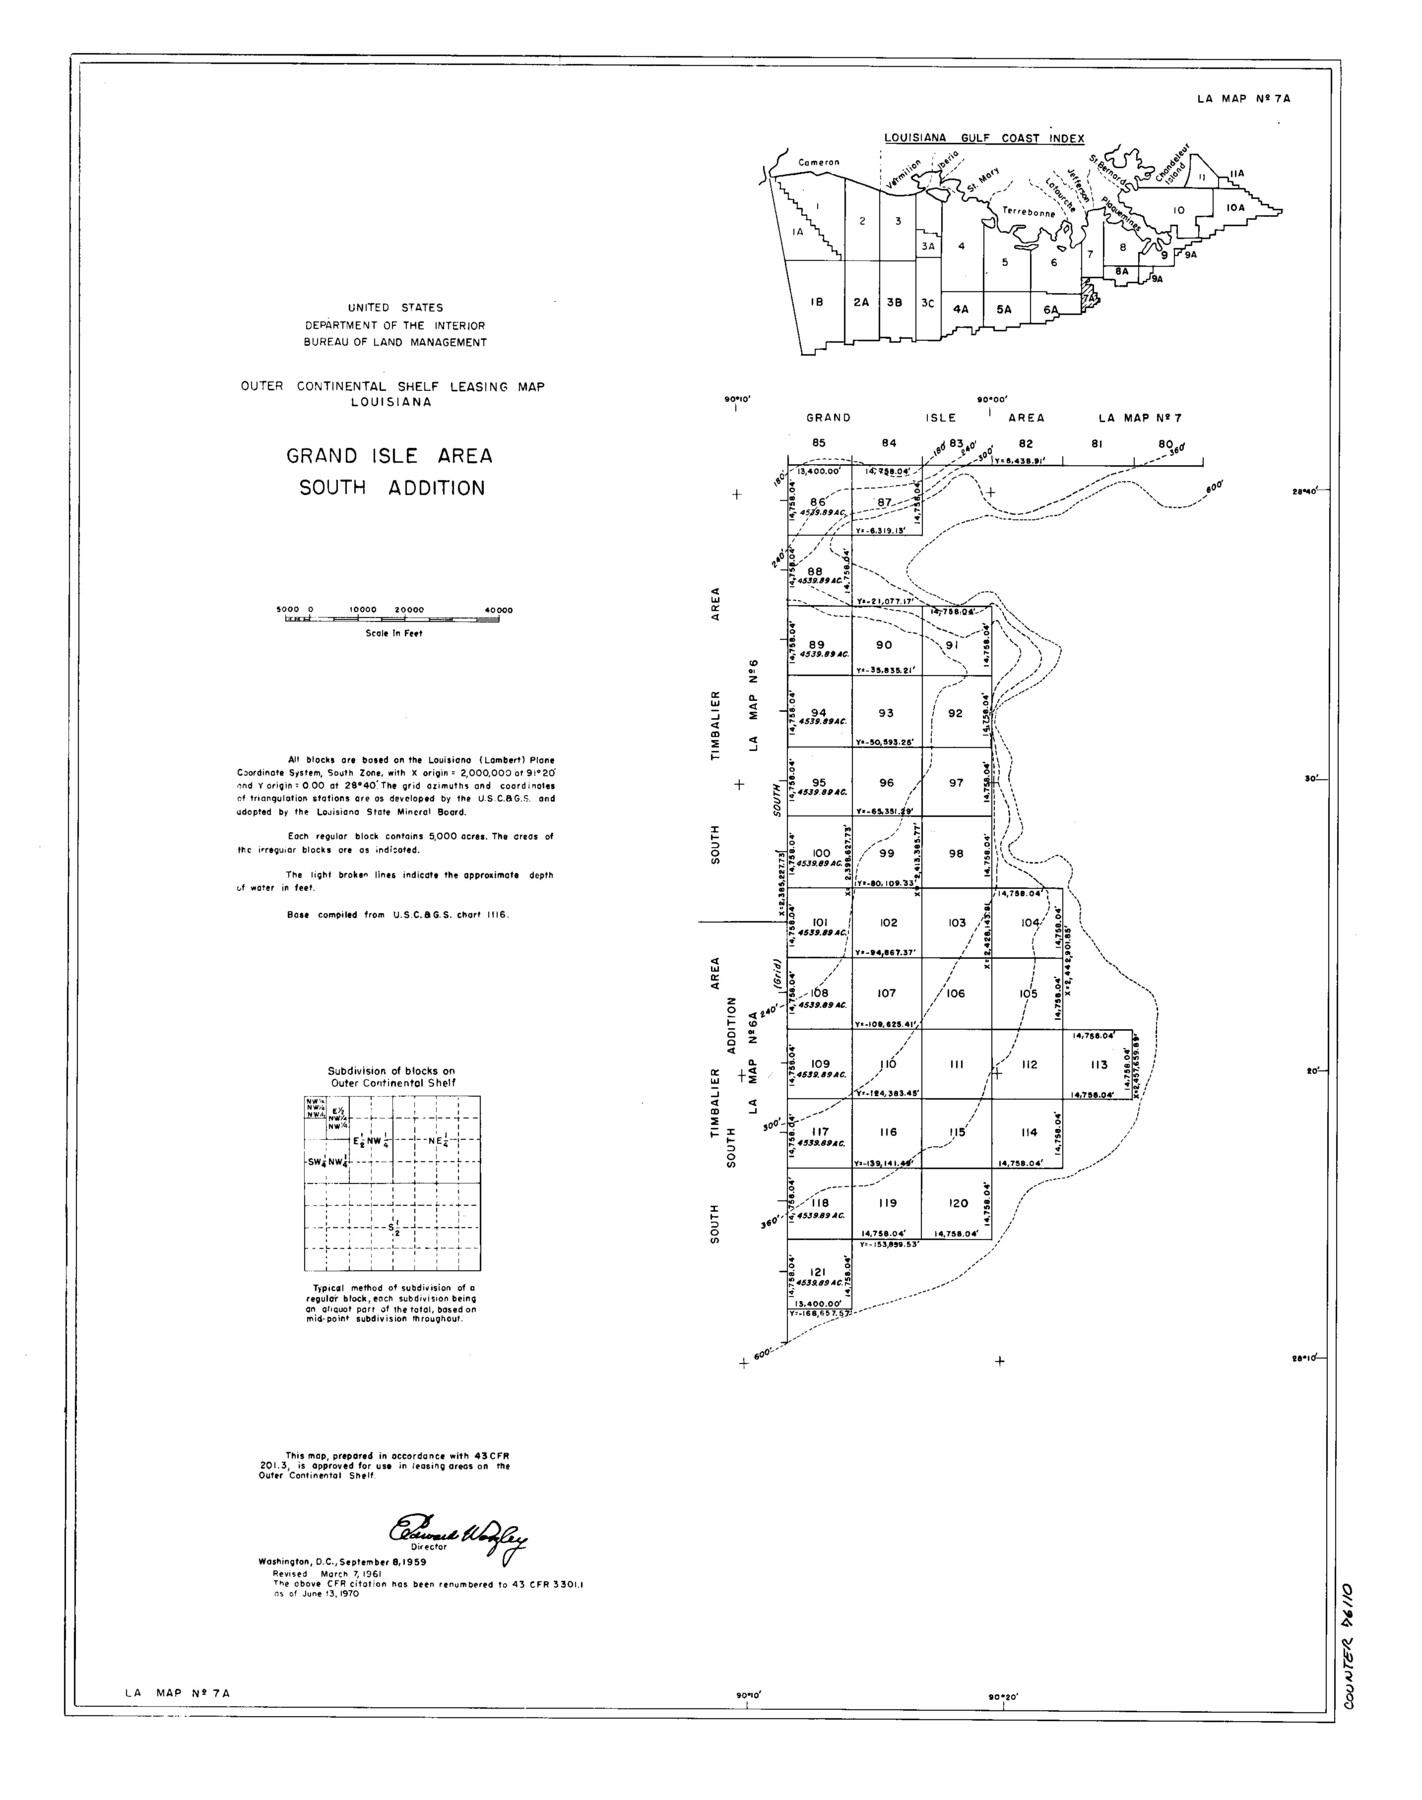 76110, Outer Continental Shelf Leasing Maps (Louisiana Offshore Operations), General Map Collection